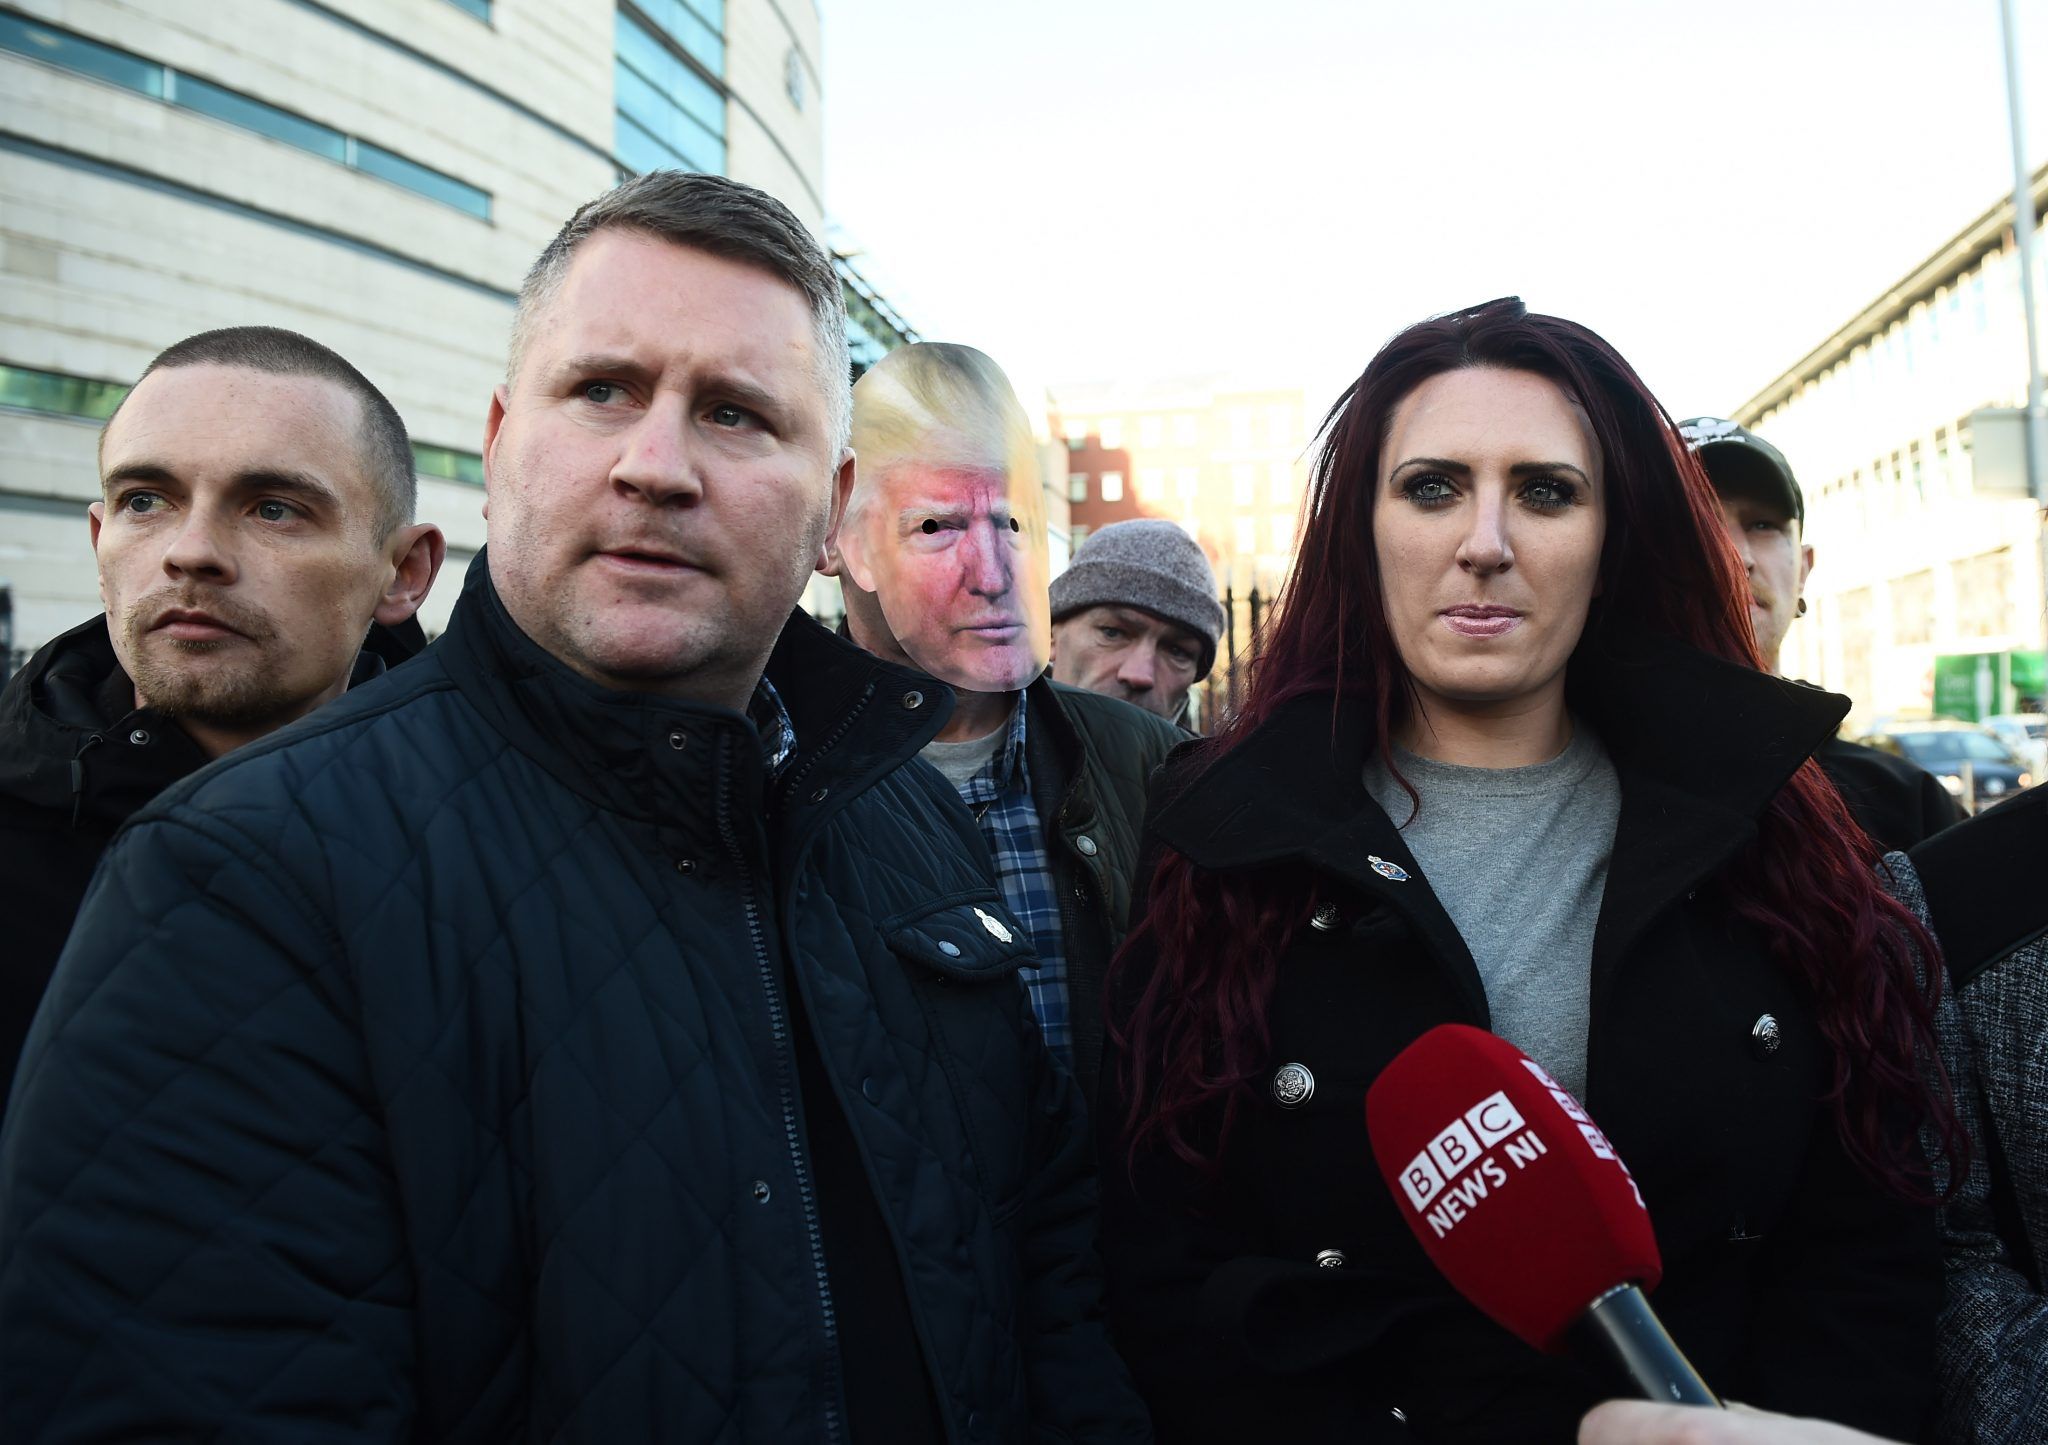 The ban includes Britain First leader Paul Golding and his former deputy Jayda Fransen (Credit: Charles McQuillan)